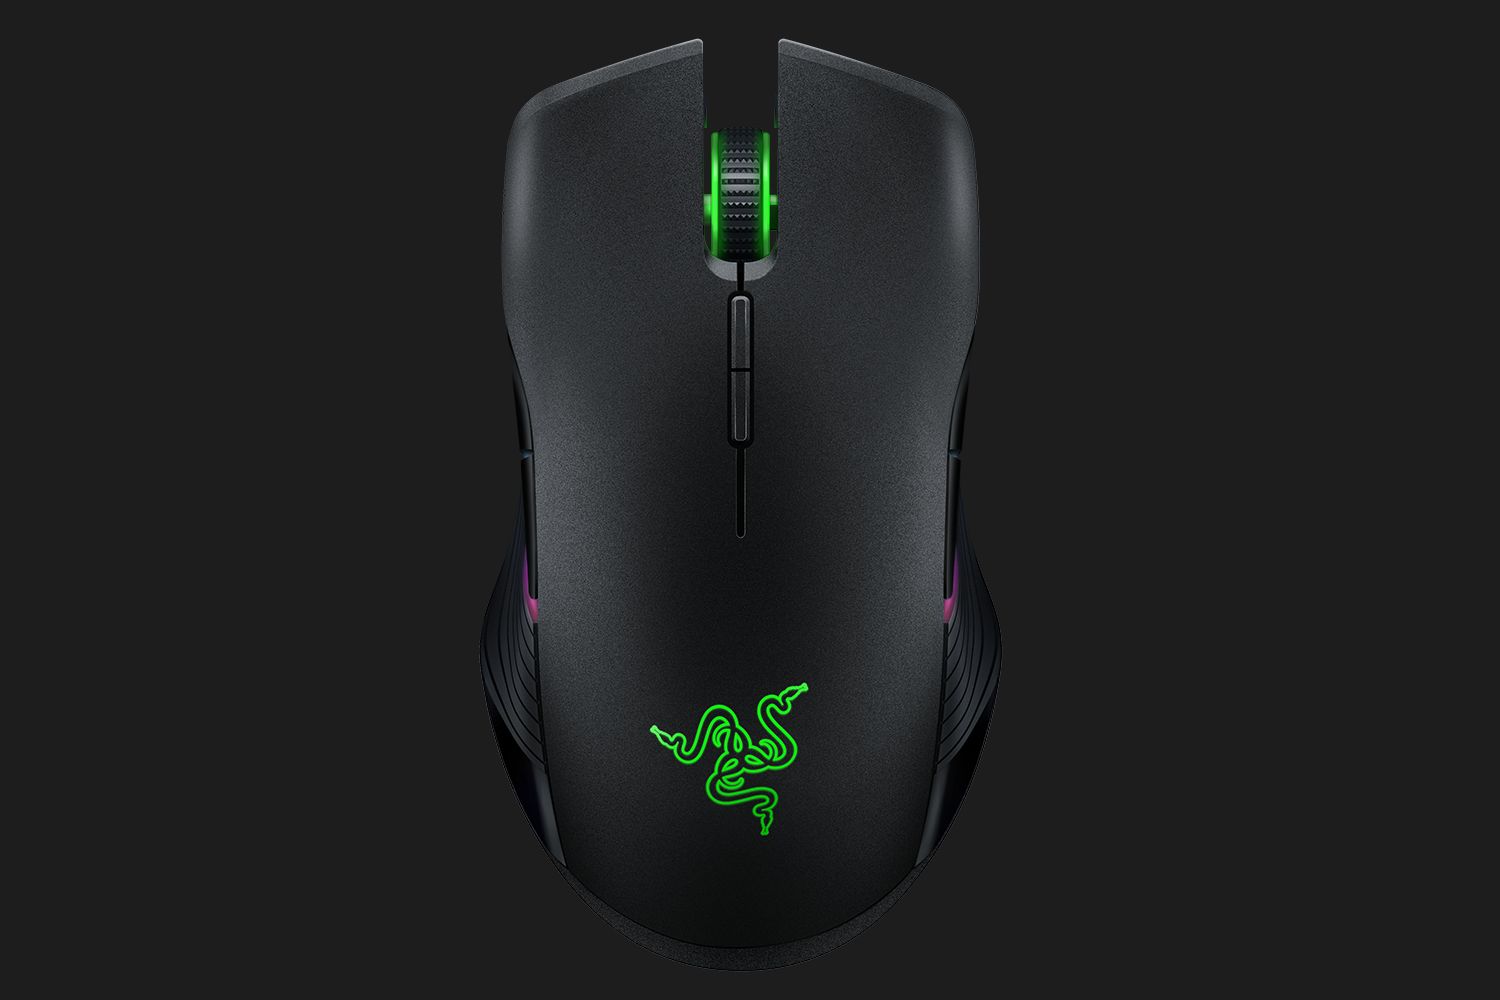 Razer’s Lancehead is a Smooth Wireless Gaming Mouse